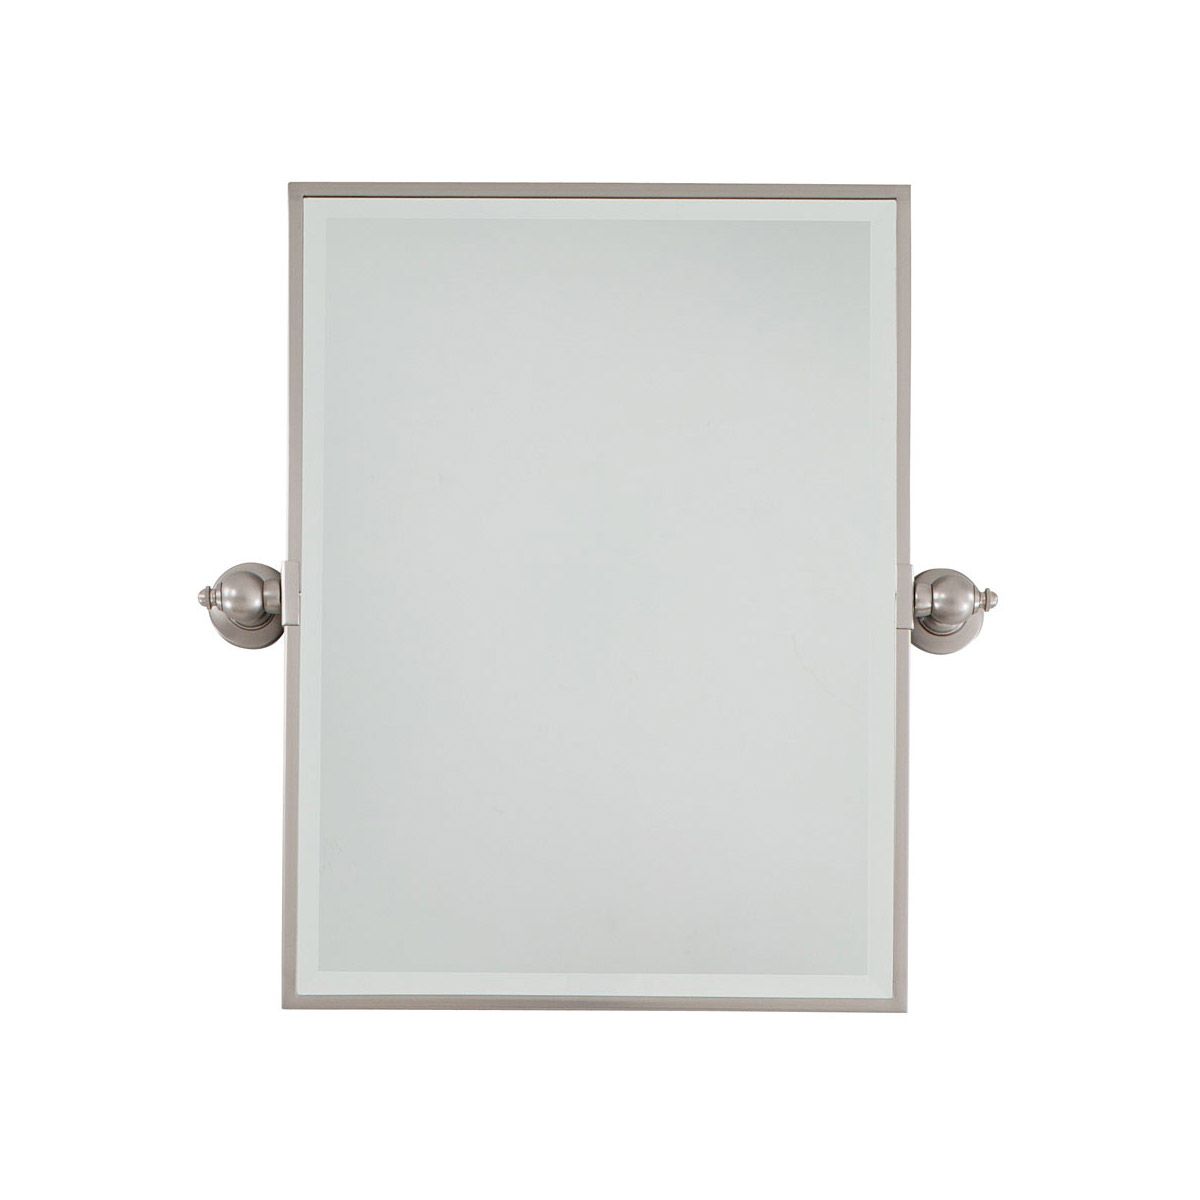 Minka Lavery 1440 84 Pivot Mirrors Wall Mirror Brushed Nickel | Ebay Intended For Polished Nickel Rectangular Wall Mirrors (View 15 of 15)